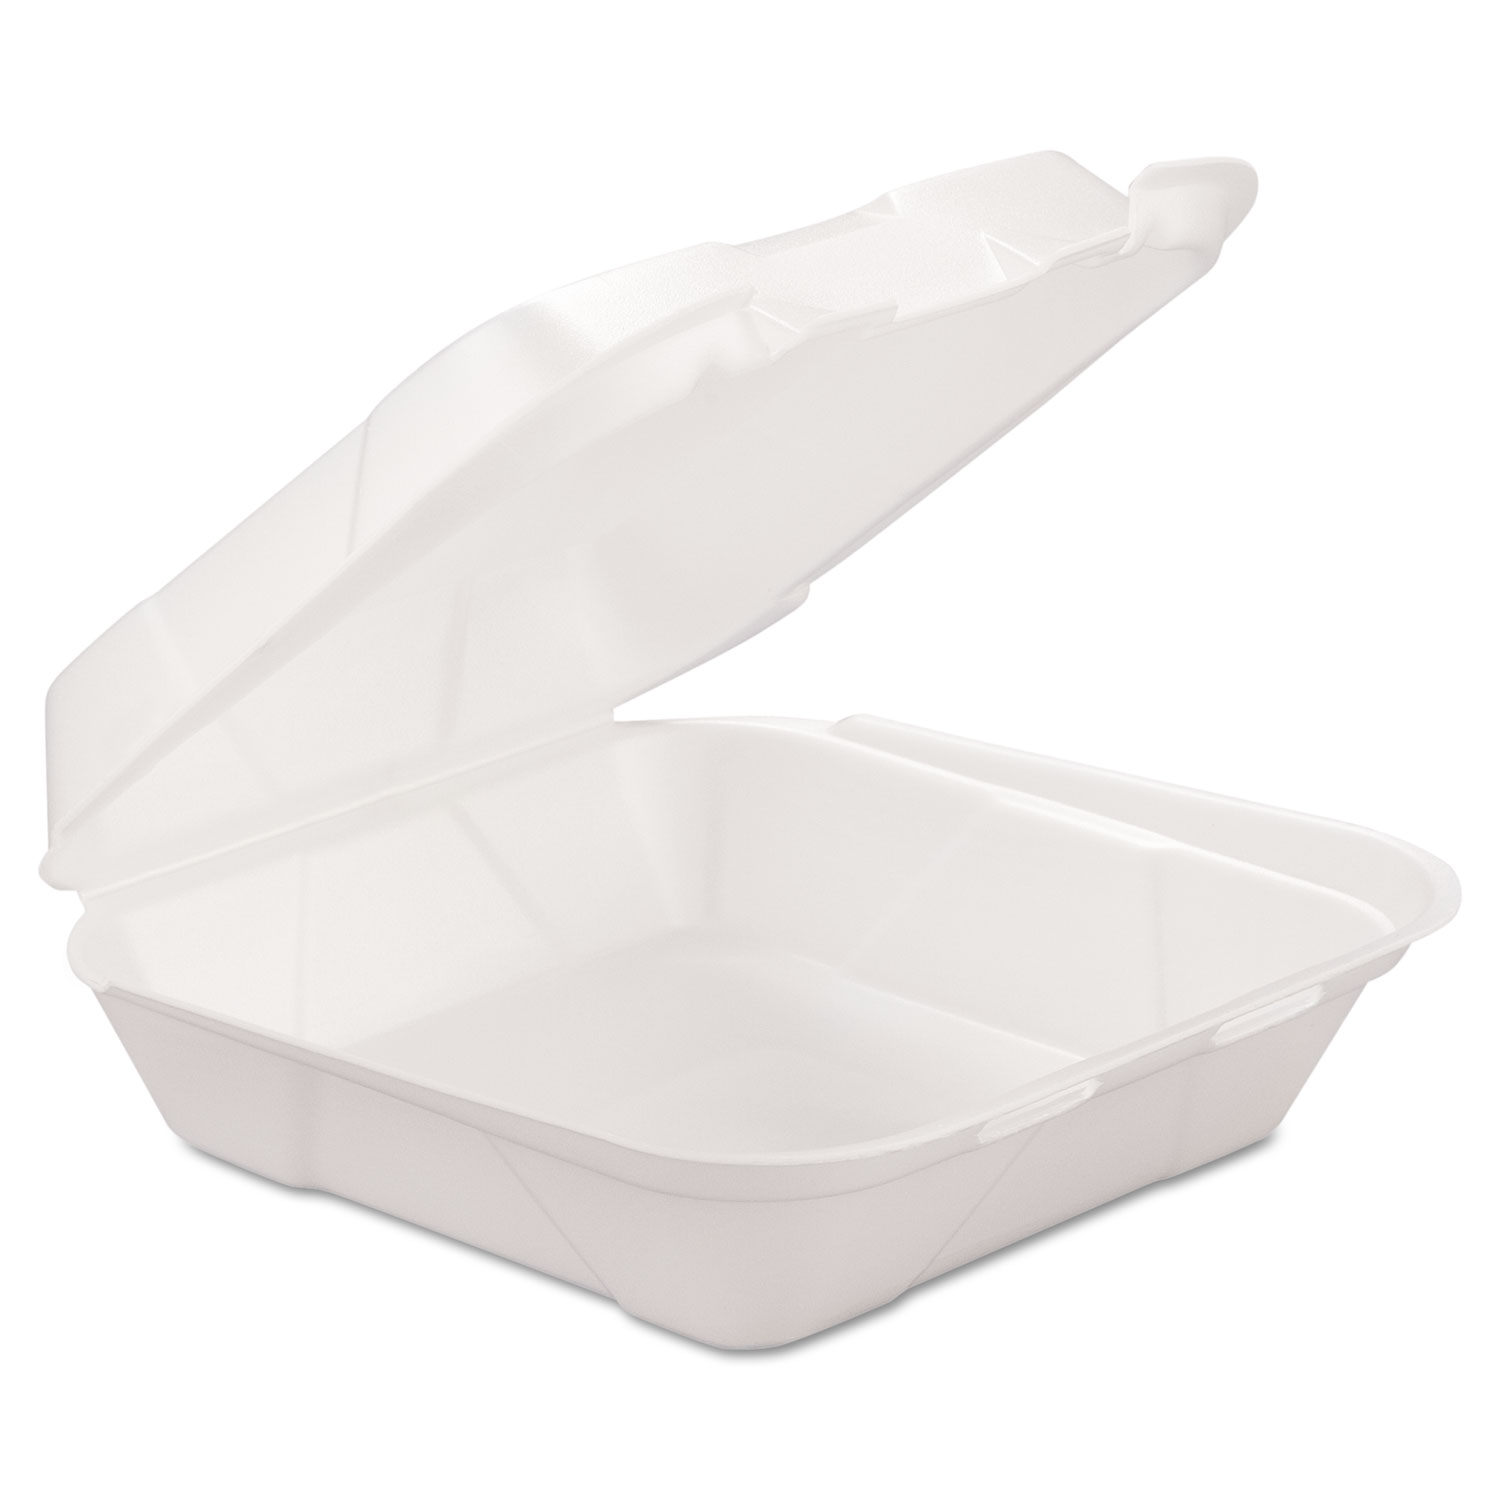  GEN SN240VW-H-0183400 Foam Hinged Carryout Container, 1-Comp, White, 8 X 8 1/4 X 3, 200/Carton (GENHINGEDM1) 